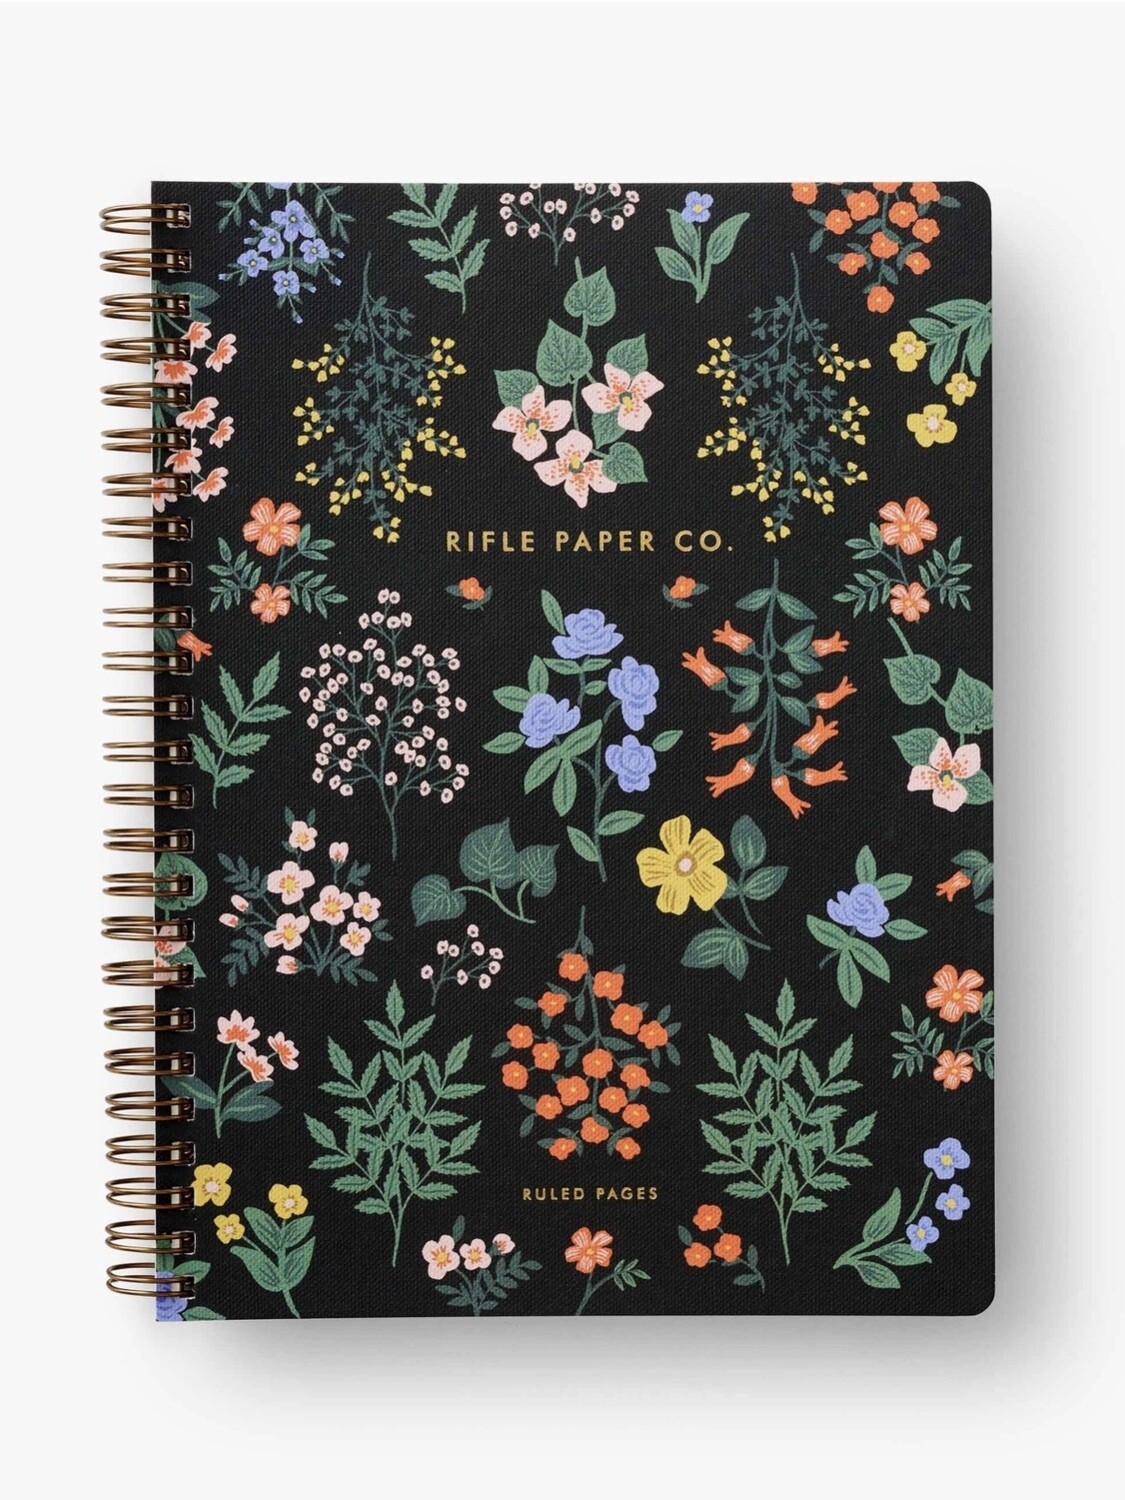 Wildwood Spiral Notebook - Rifle Paper Co. RPC71